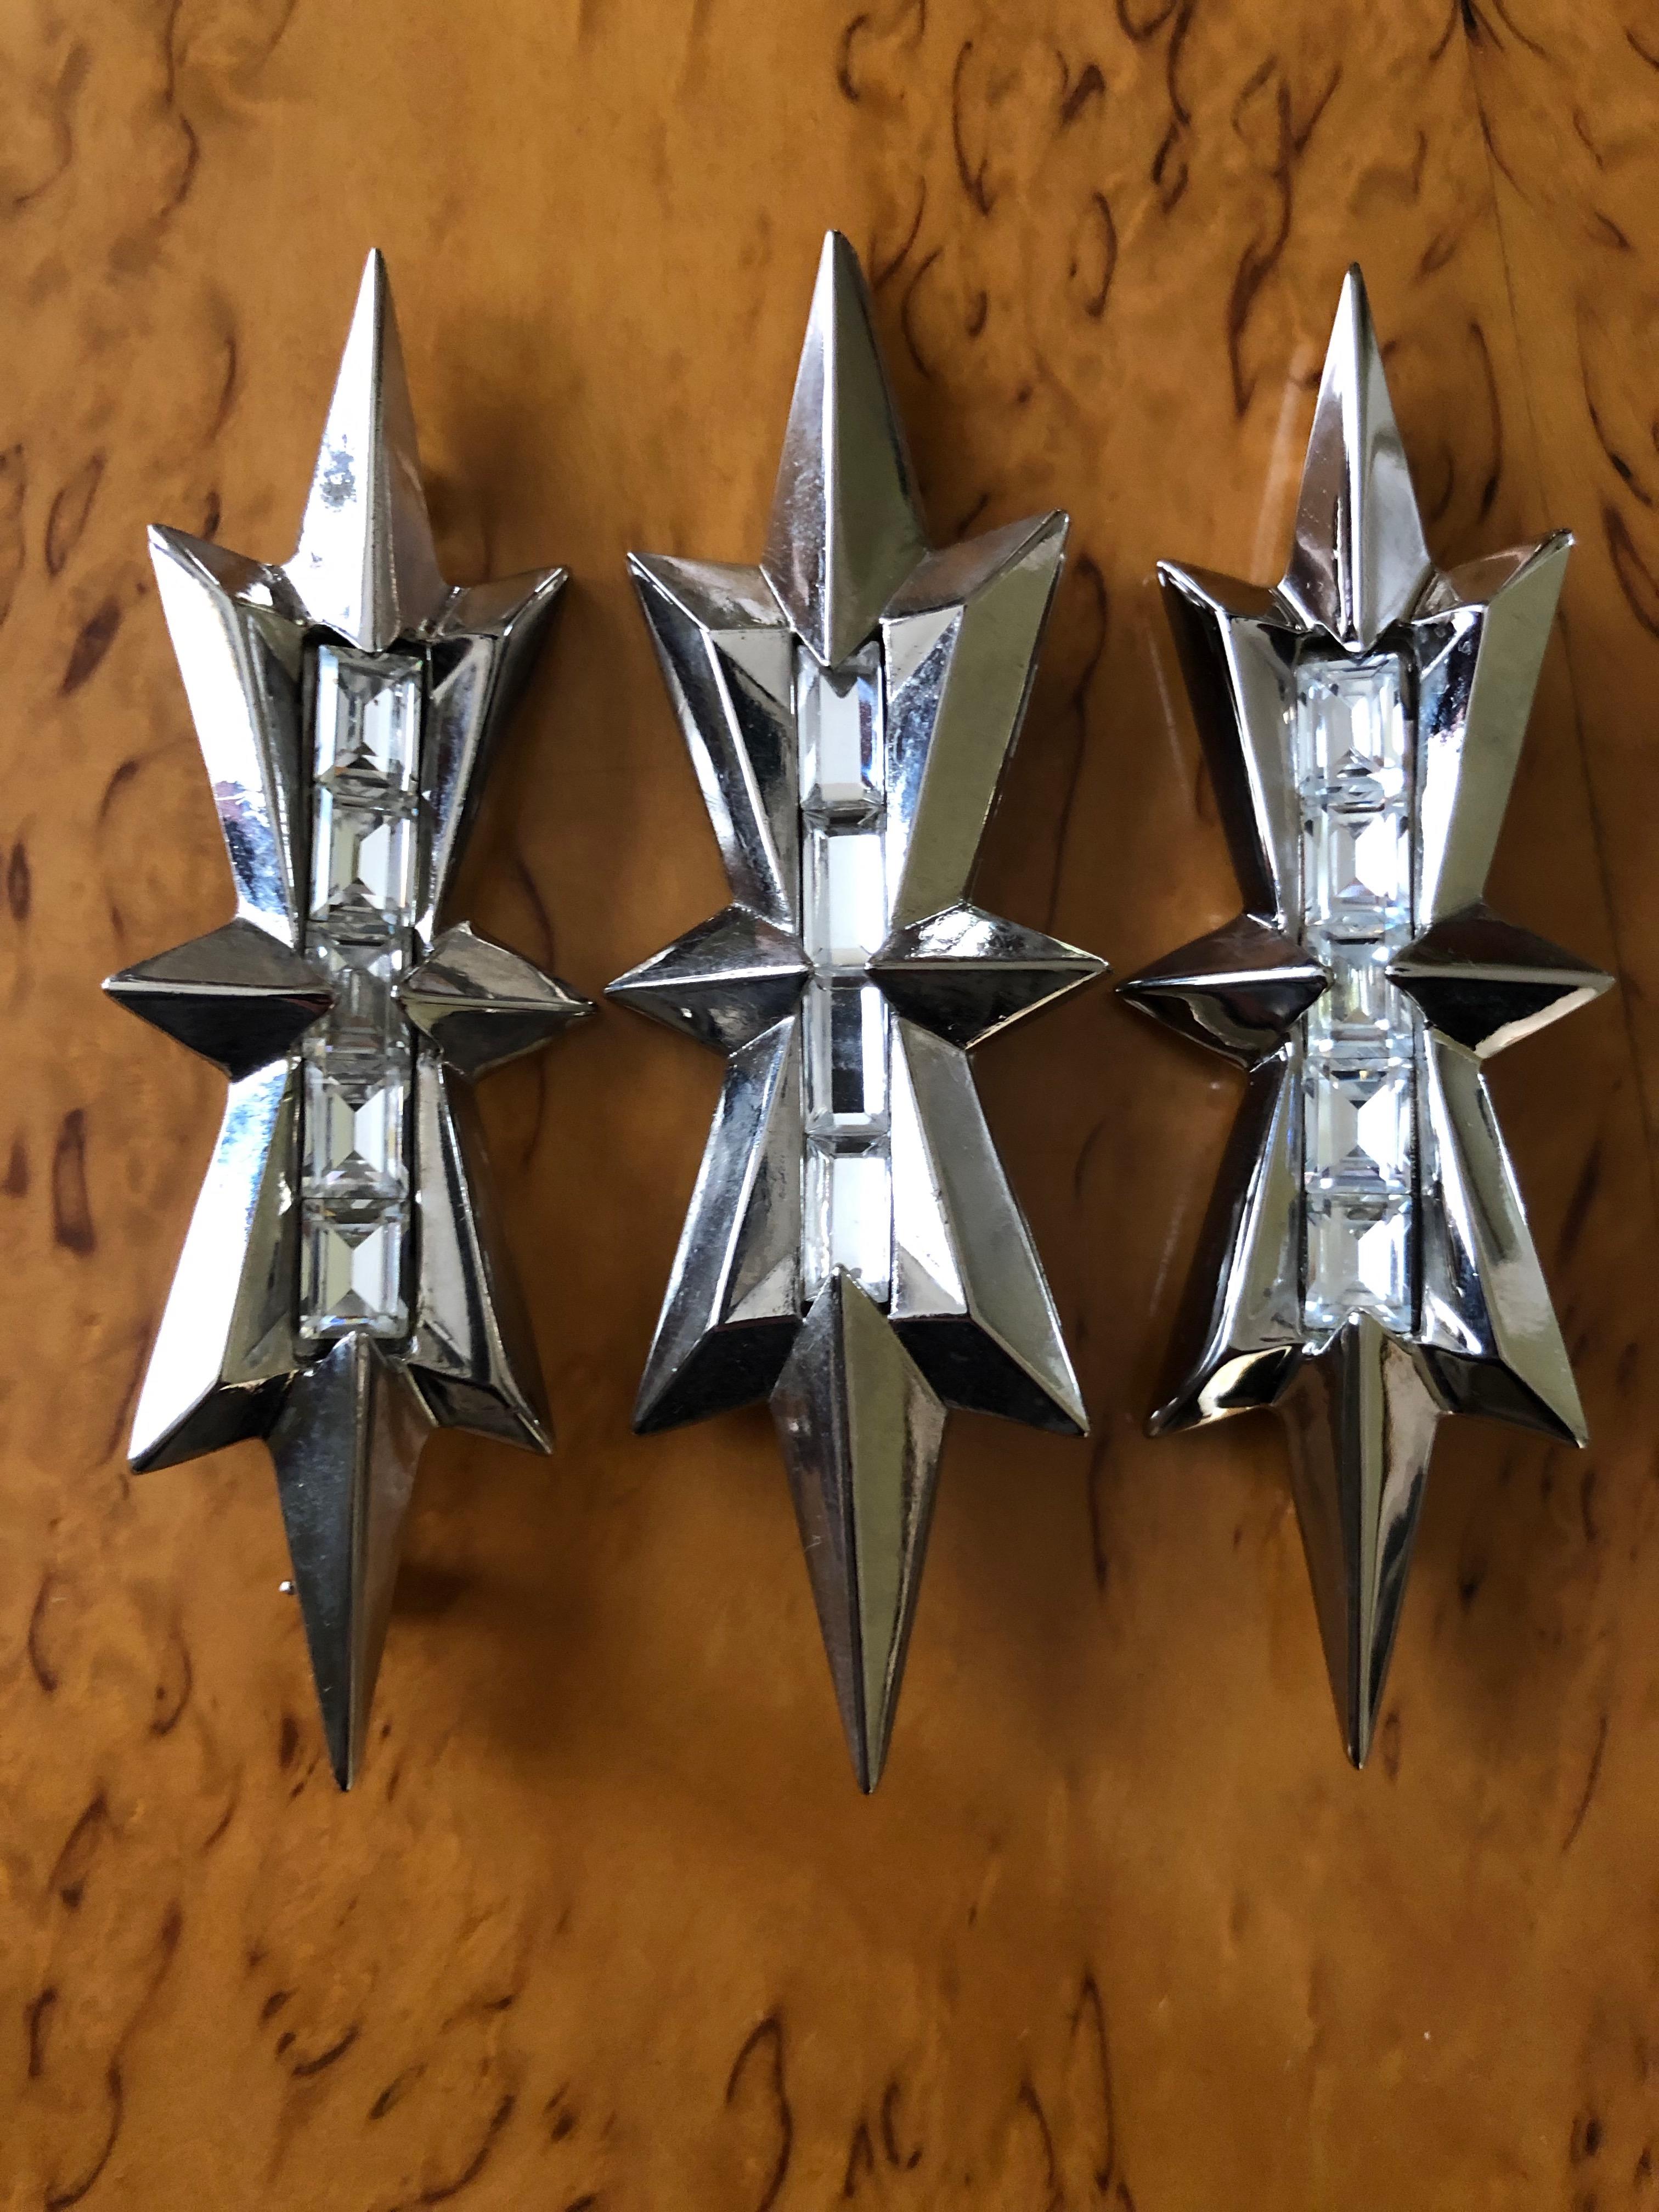 Thierry Mugler Vintage Three SIlver Alien Star Pins w Baguette Crystal Accents.
3